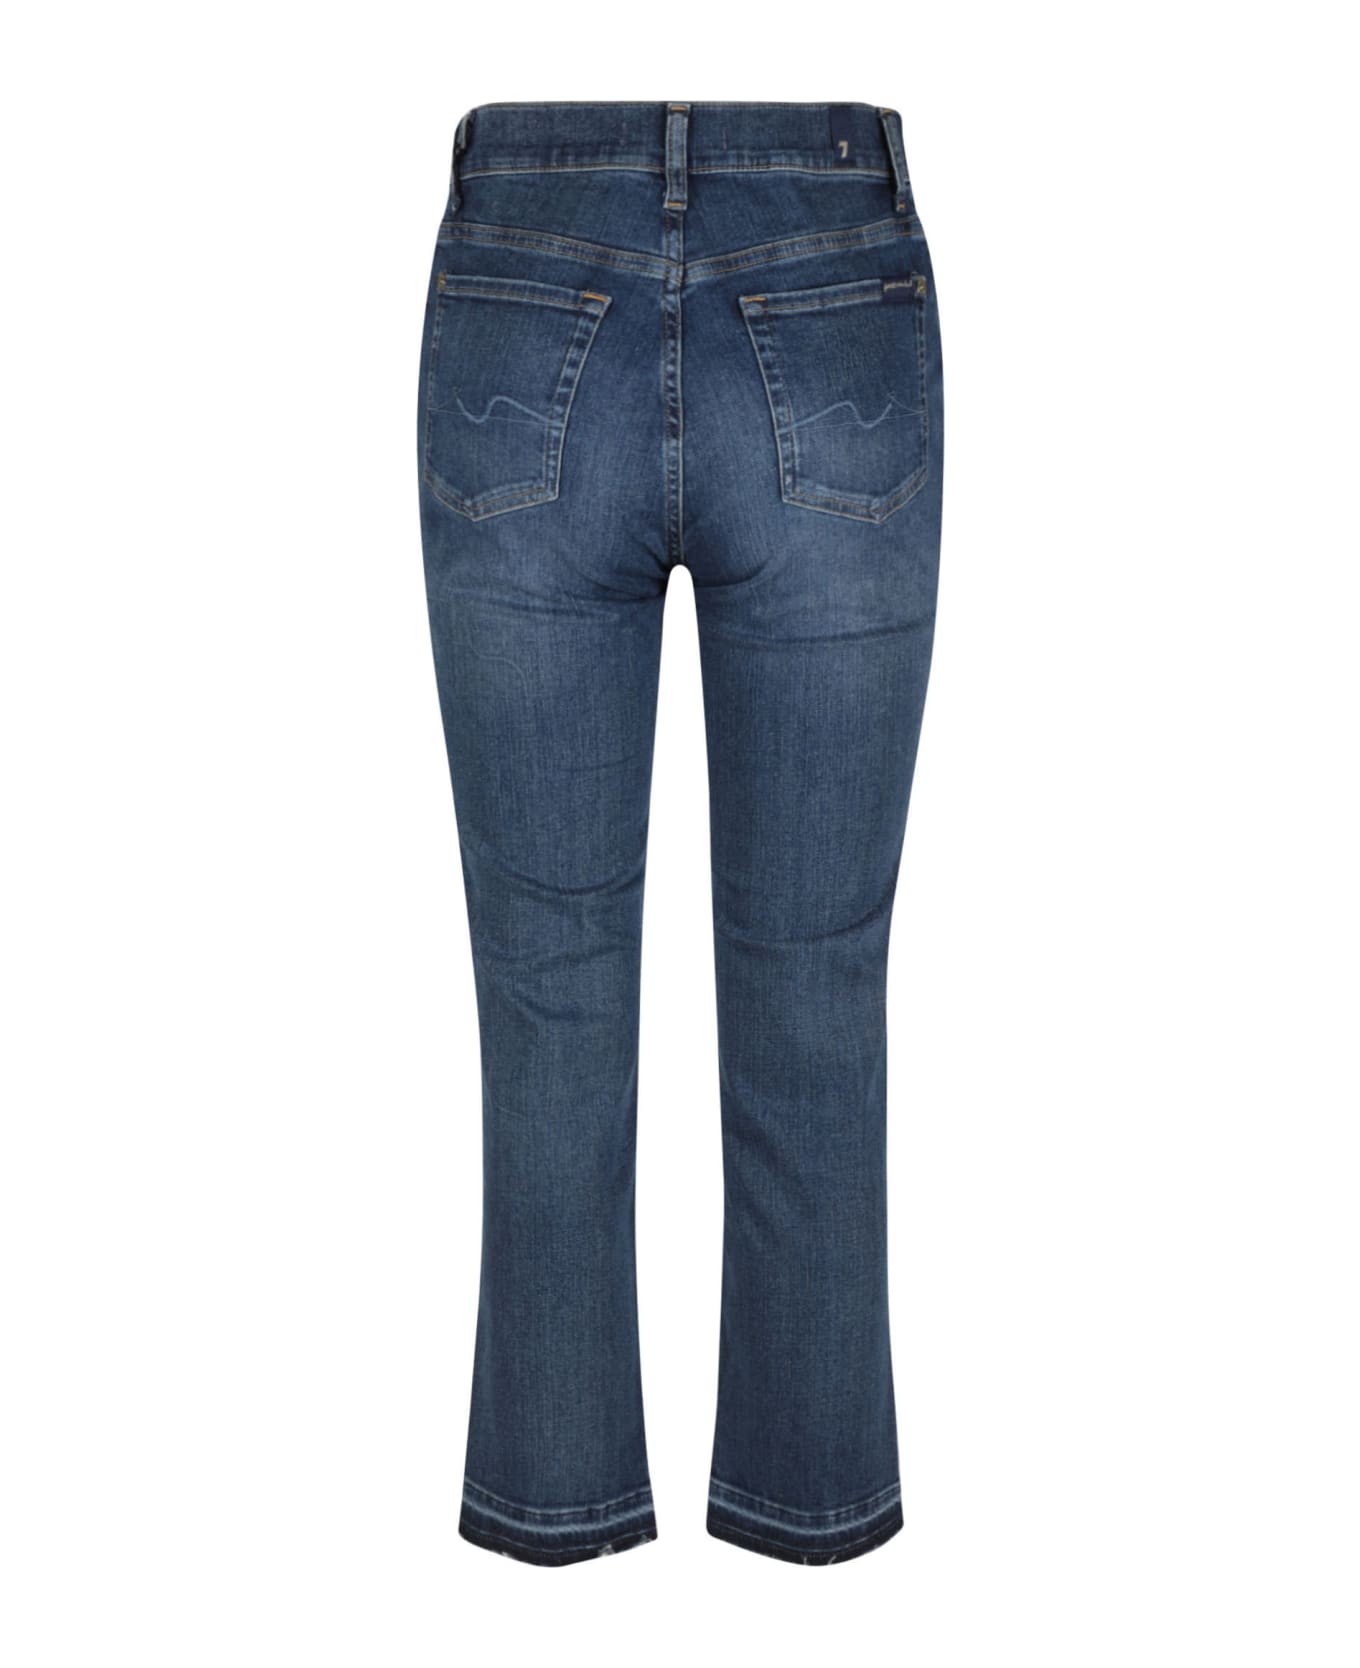 7 For All Mankind The Straight Crop Jeans - Light Blue デニム